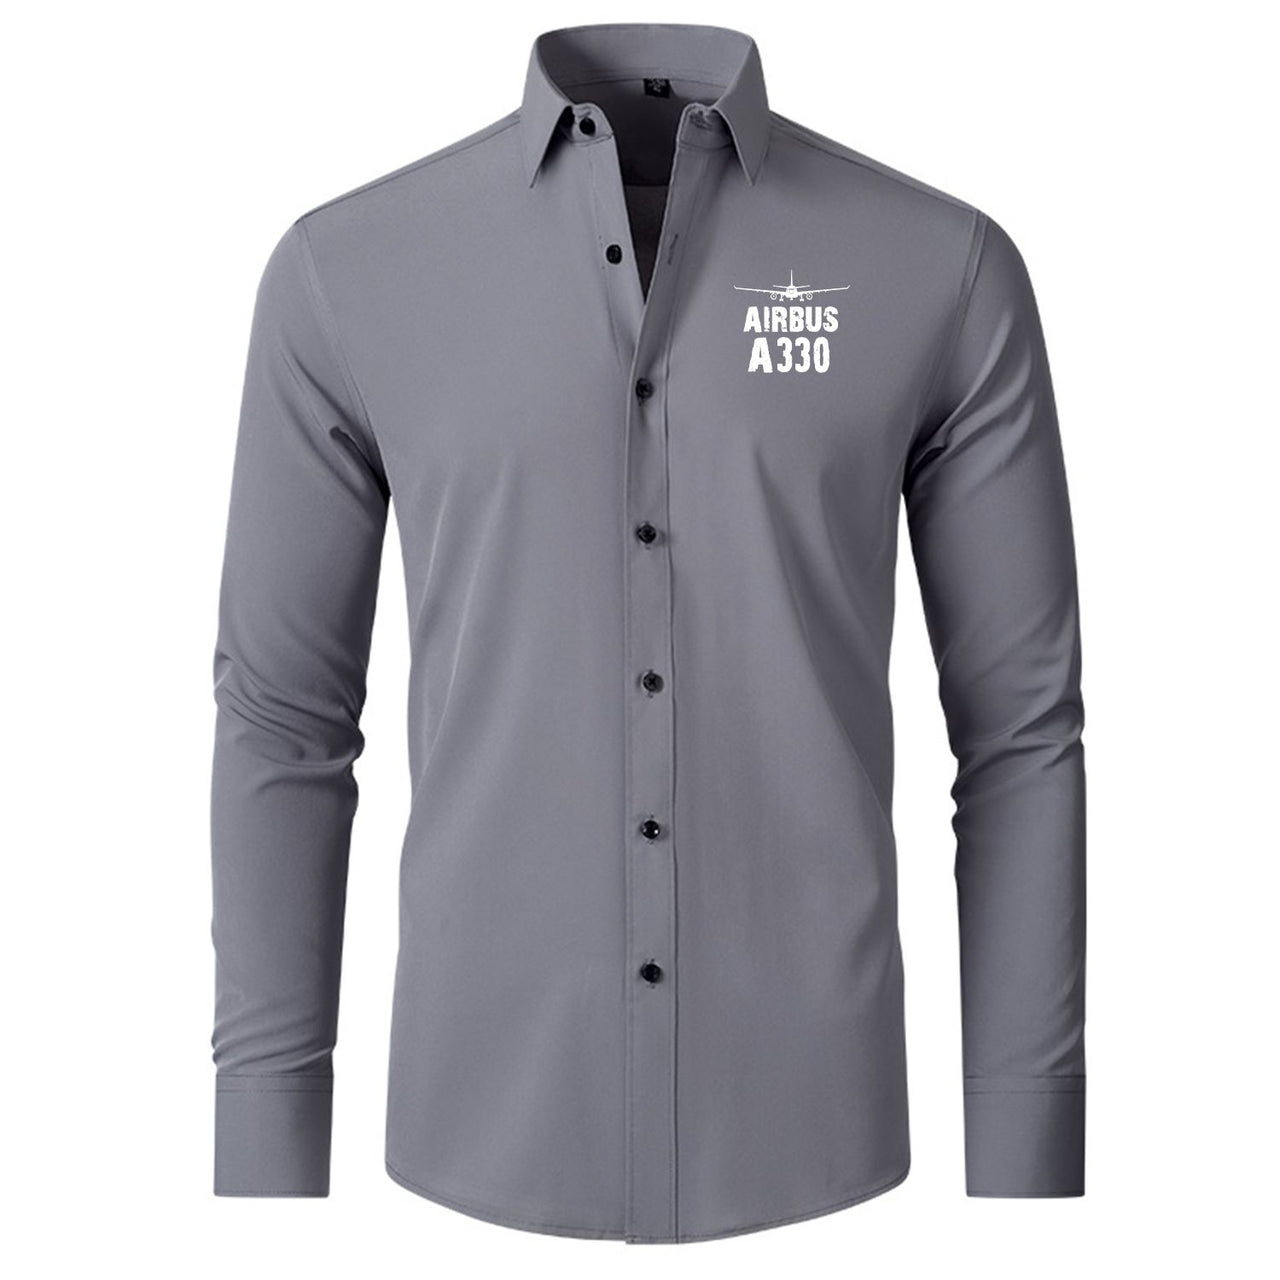 Airbus A330 & Plane Designed Long Sleeve Shirts